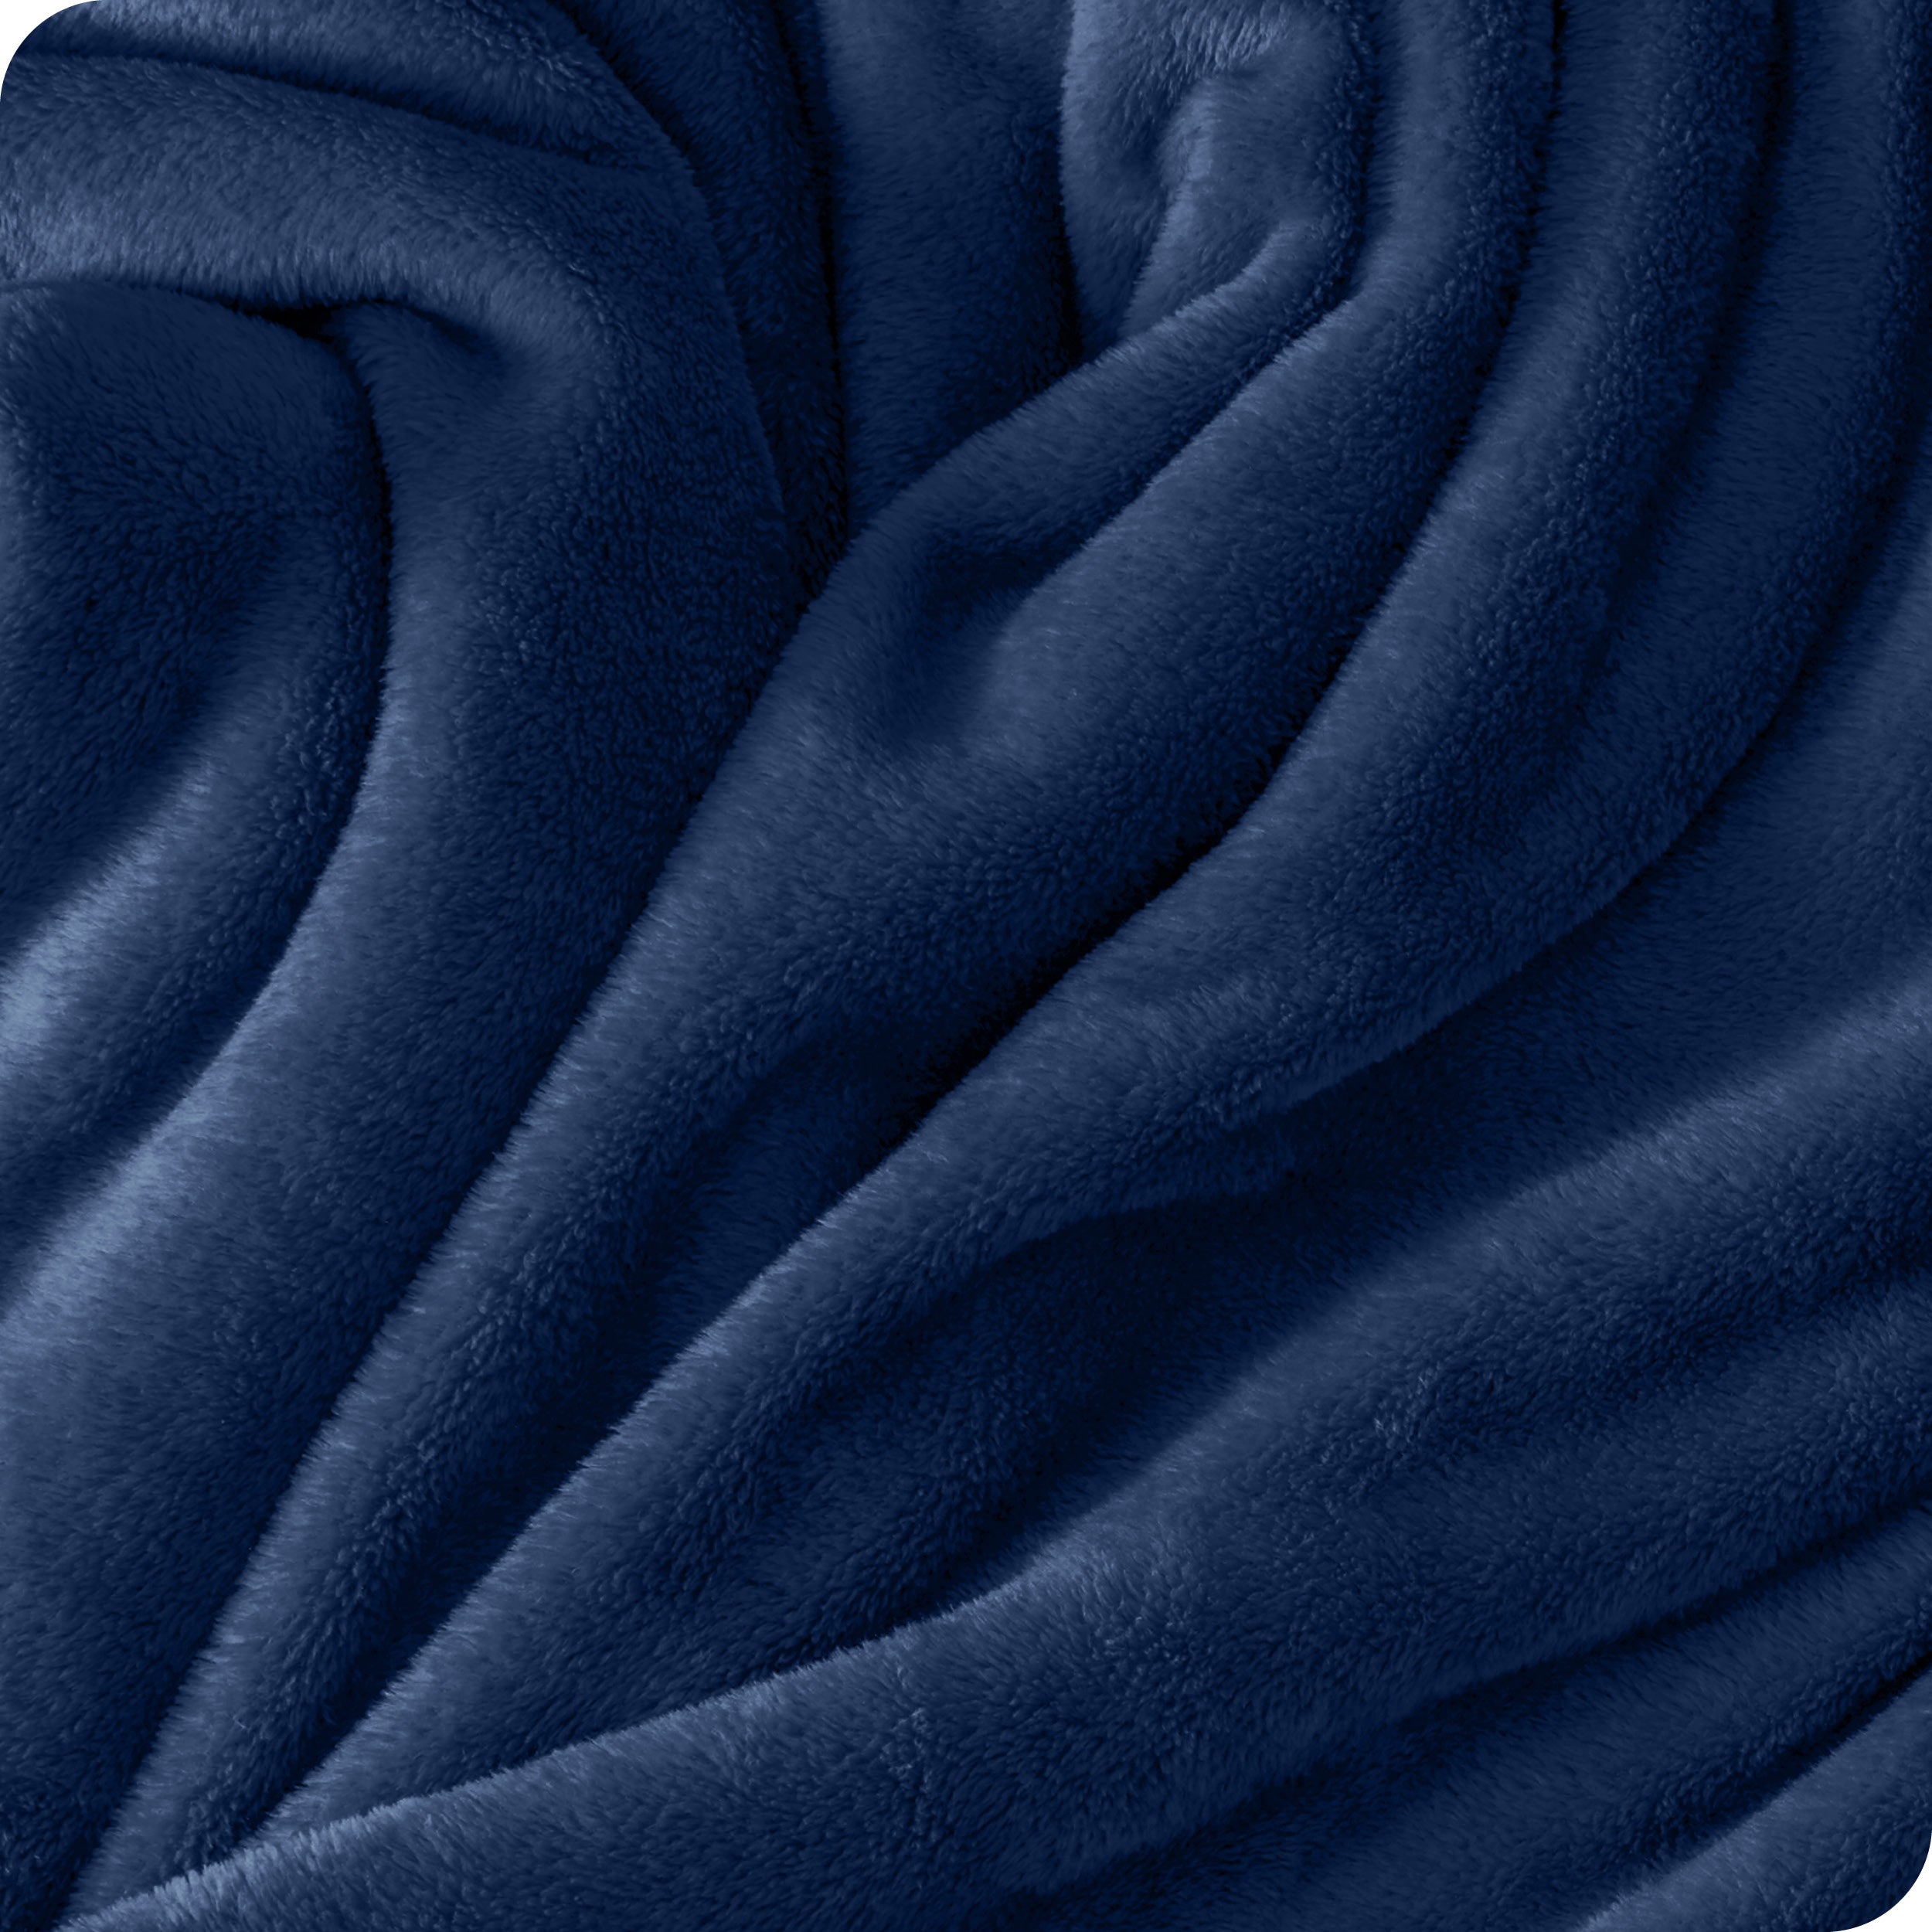 Close in view showing texture of blanket fabric